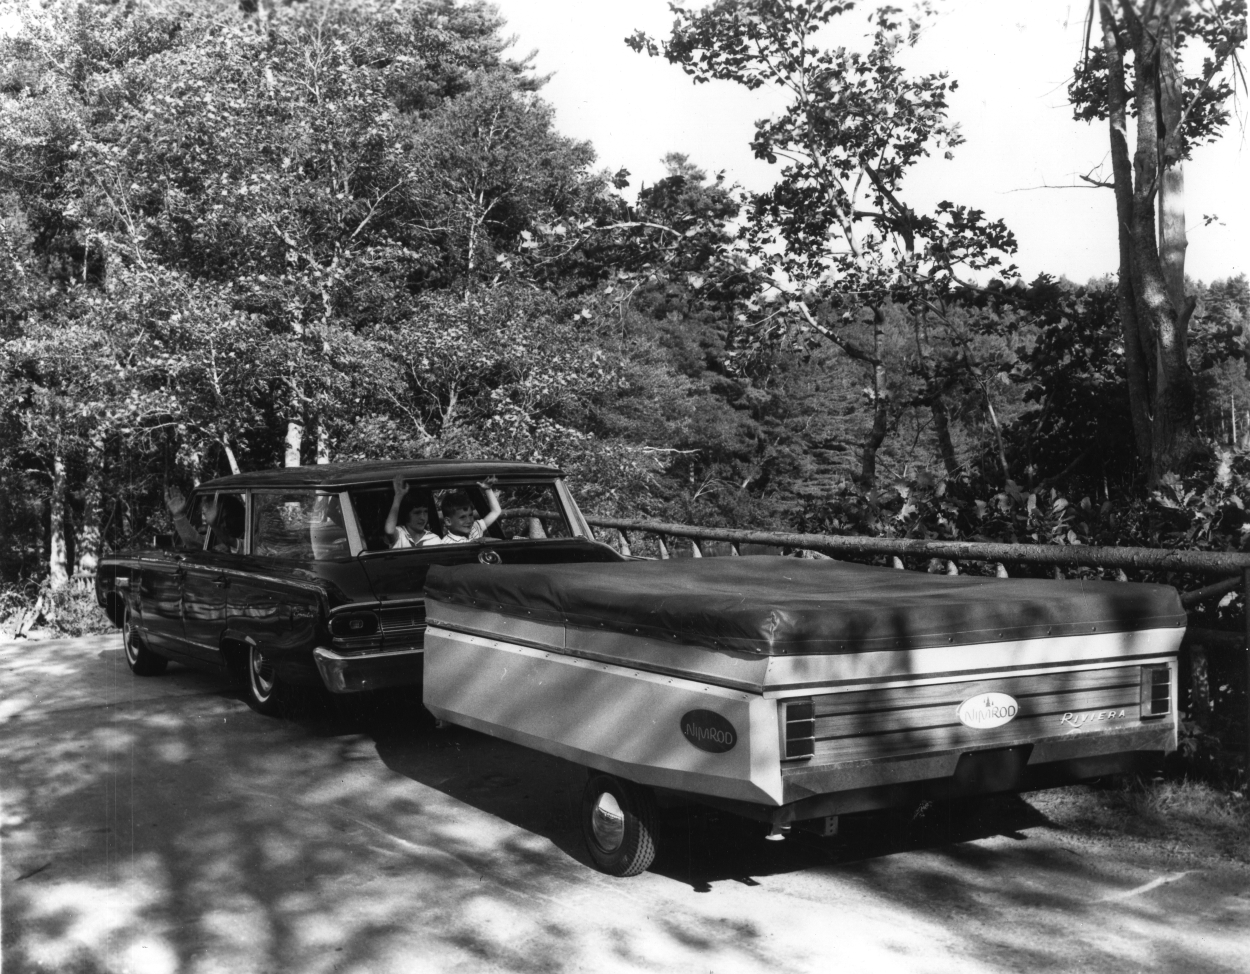 An old black and white photo of a family towing a pop-up camper